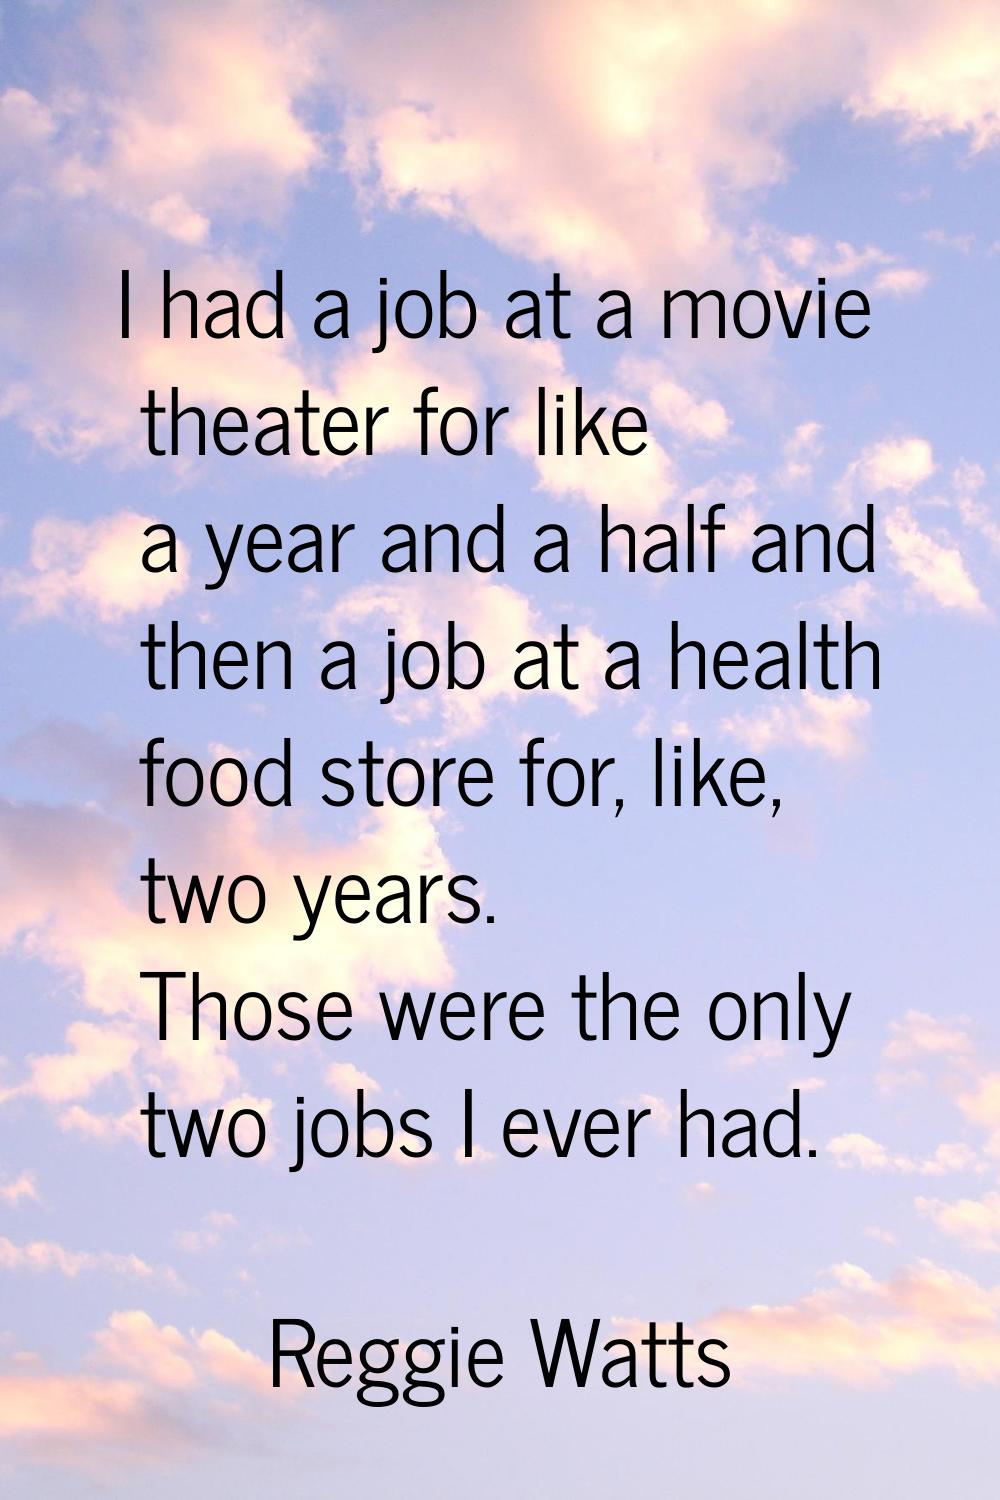 I had a job at a movie theater for like a year and a half and then a job at a health food store for